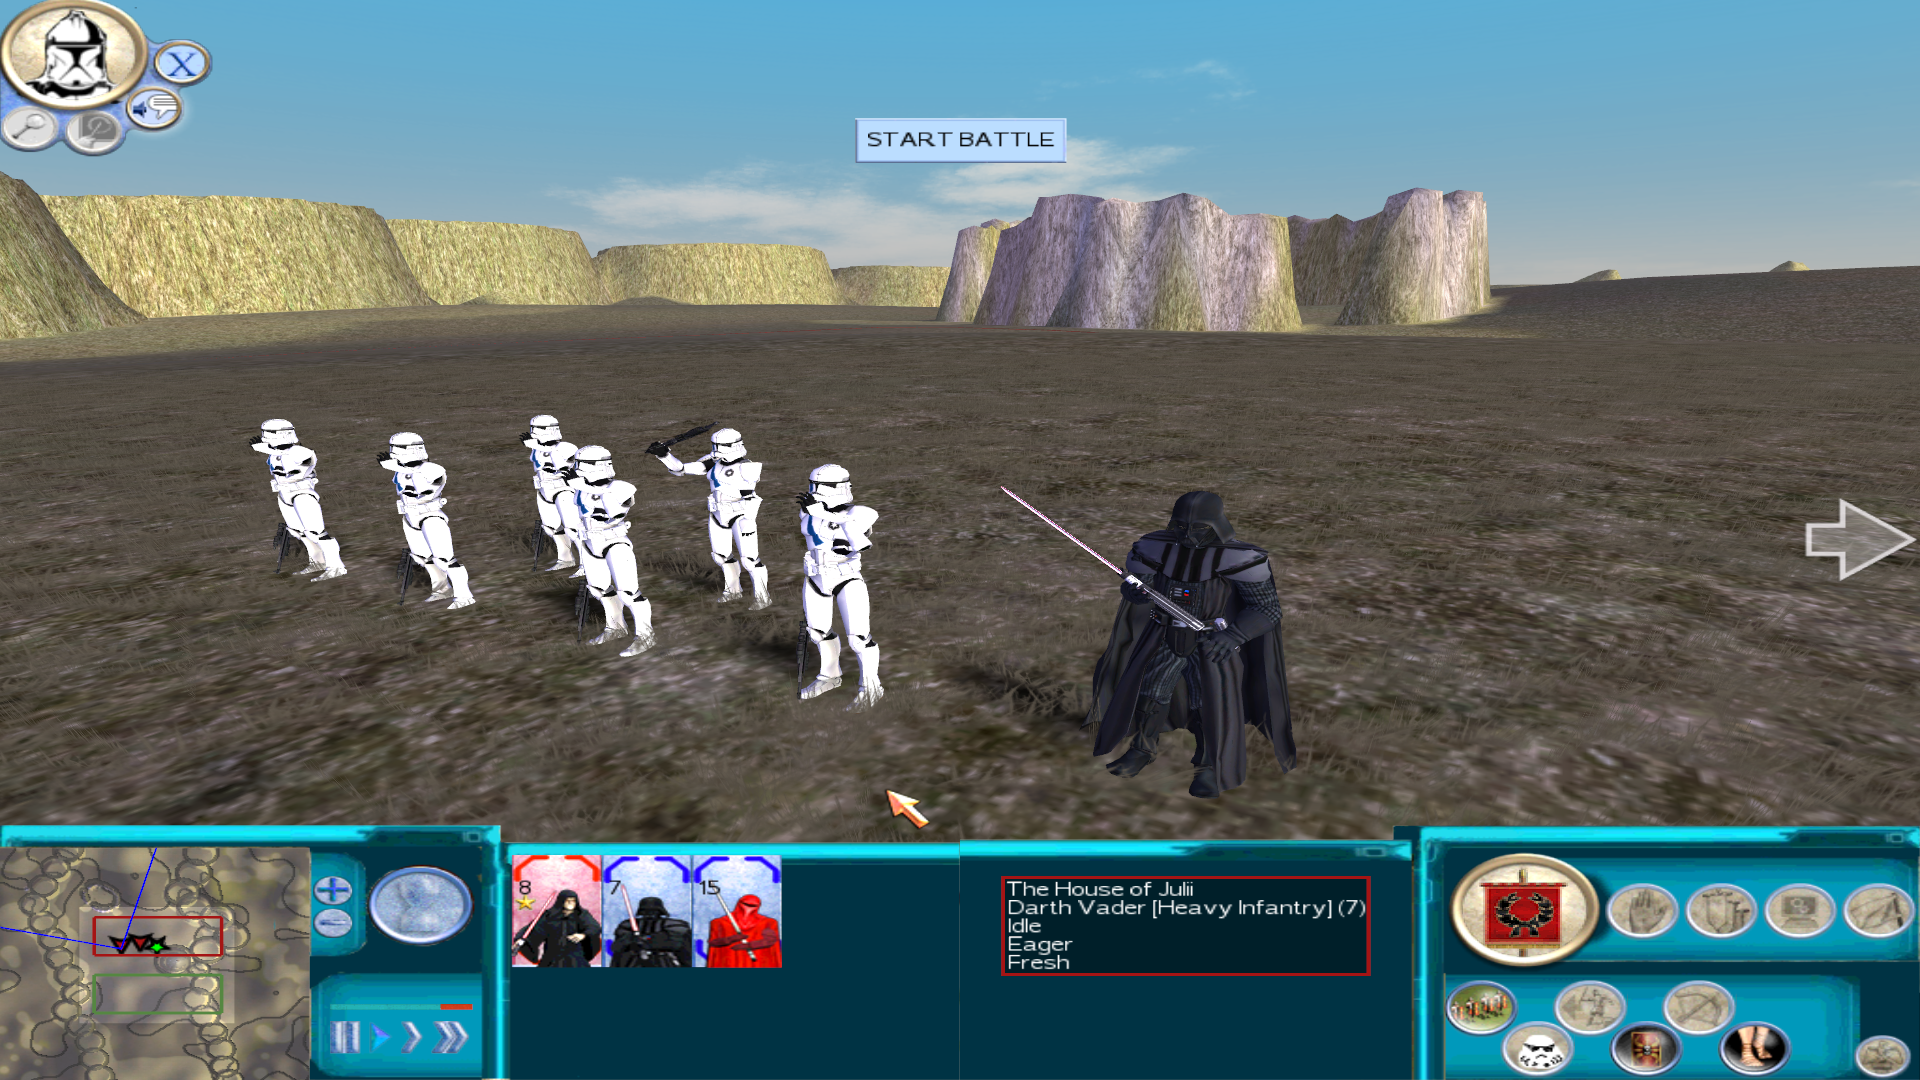 Star Wars Total War - Darth Vader with a new bodyguard!